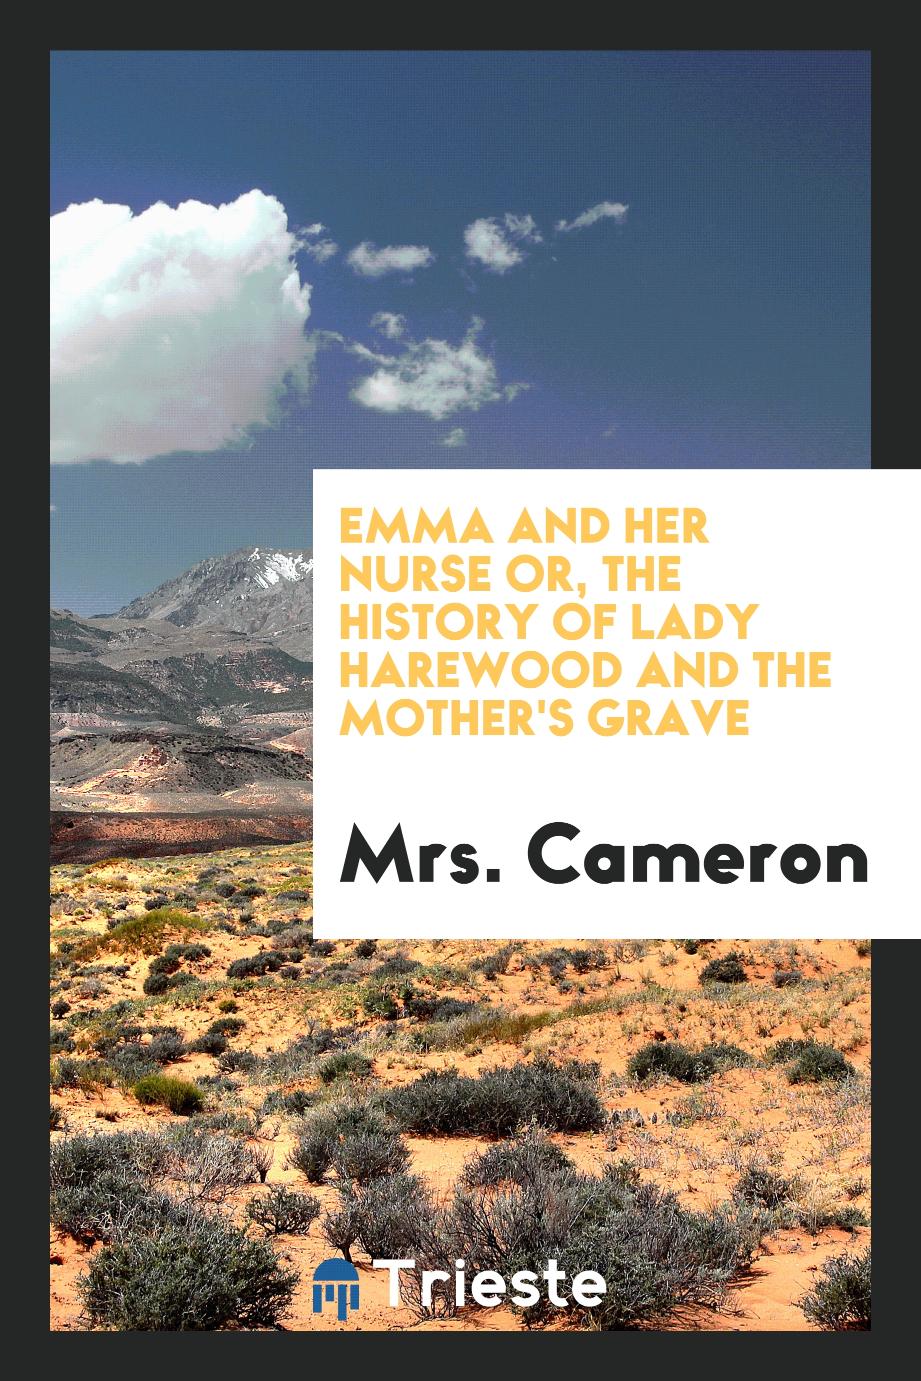 Mrs. Cameron - Emma and Her Nurse or, the History of Lady Harewood and the Mother's Grave